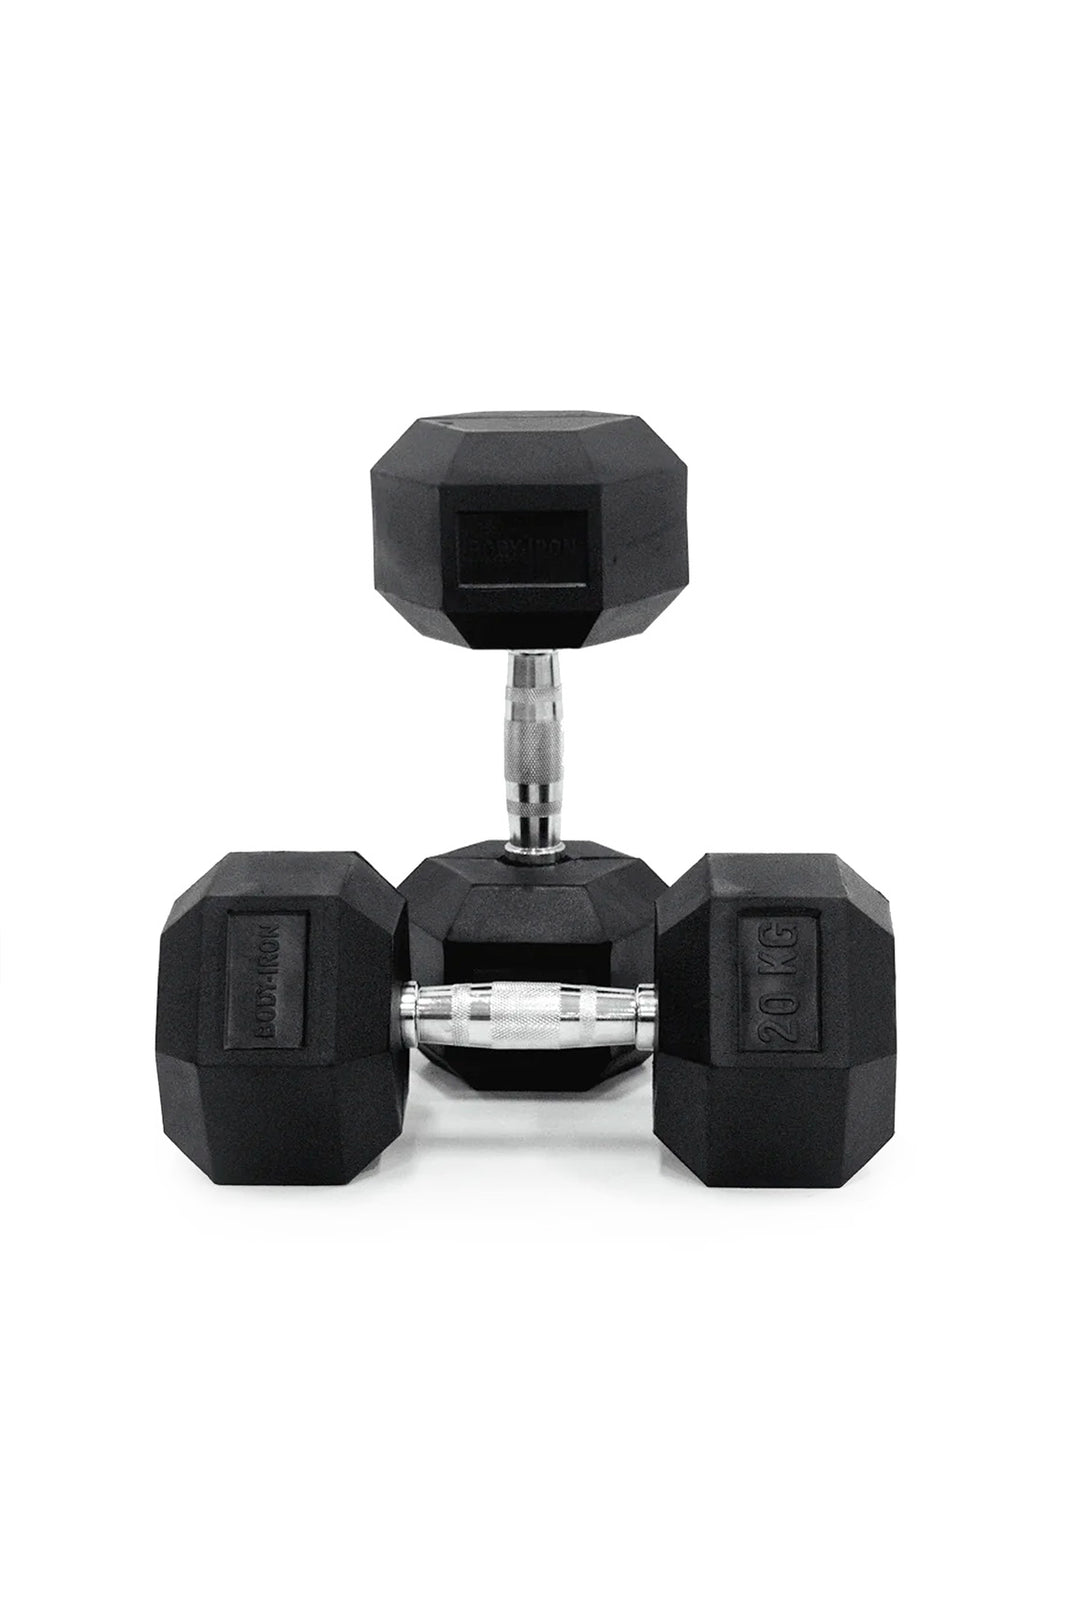 20kg Body Iron Commercial Rubber Hex Dumbbell Pair